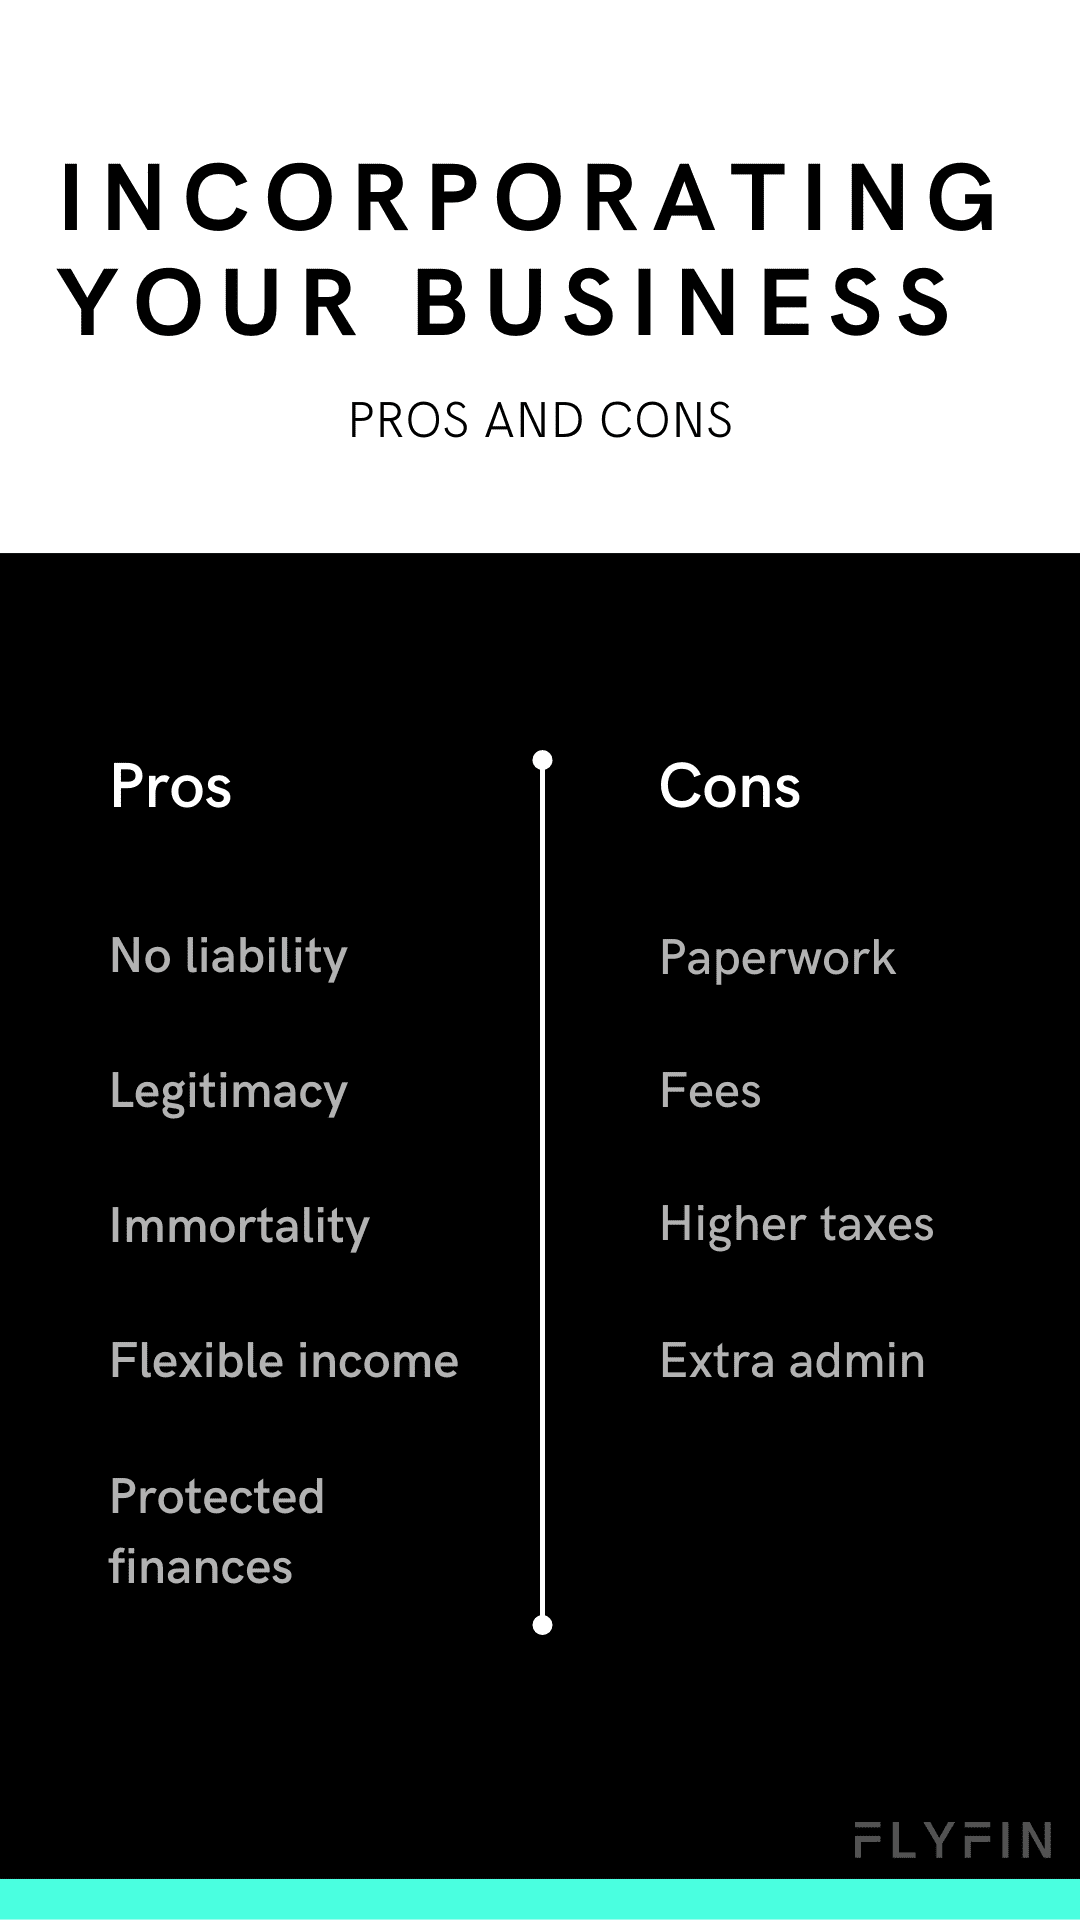 Image discussing the pros and cons of incorporating a business. Benefits include no liability, legitimacy, and protected finances, while drawbacks include paperwork, fees, and higher taxes. Relevant for self-employed, 1099, and freelancer individuals.